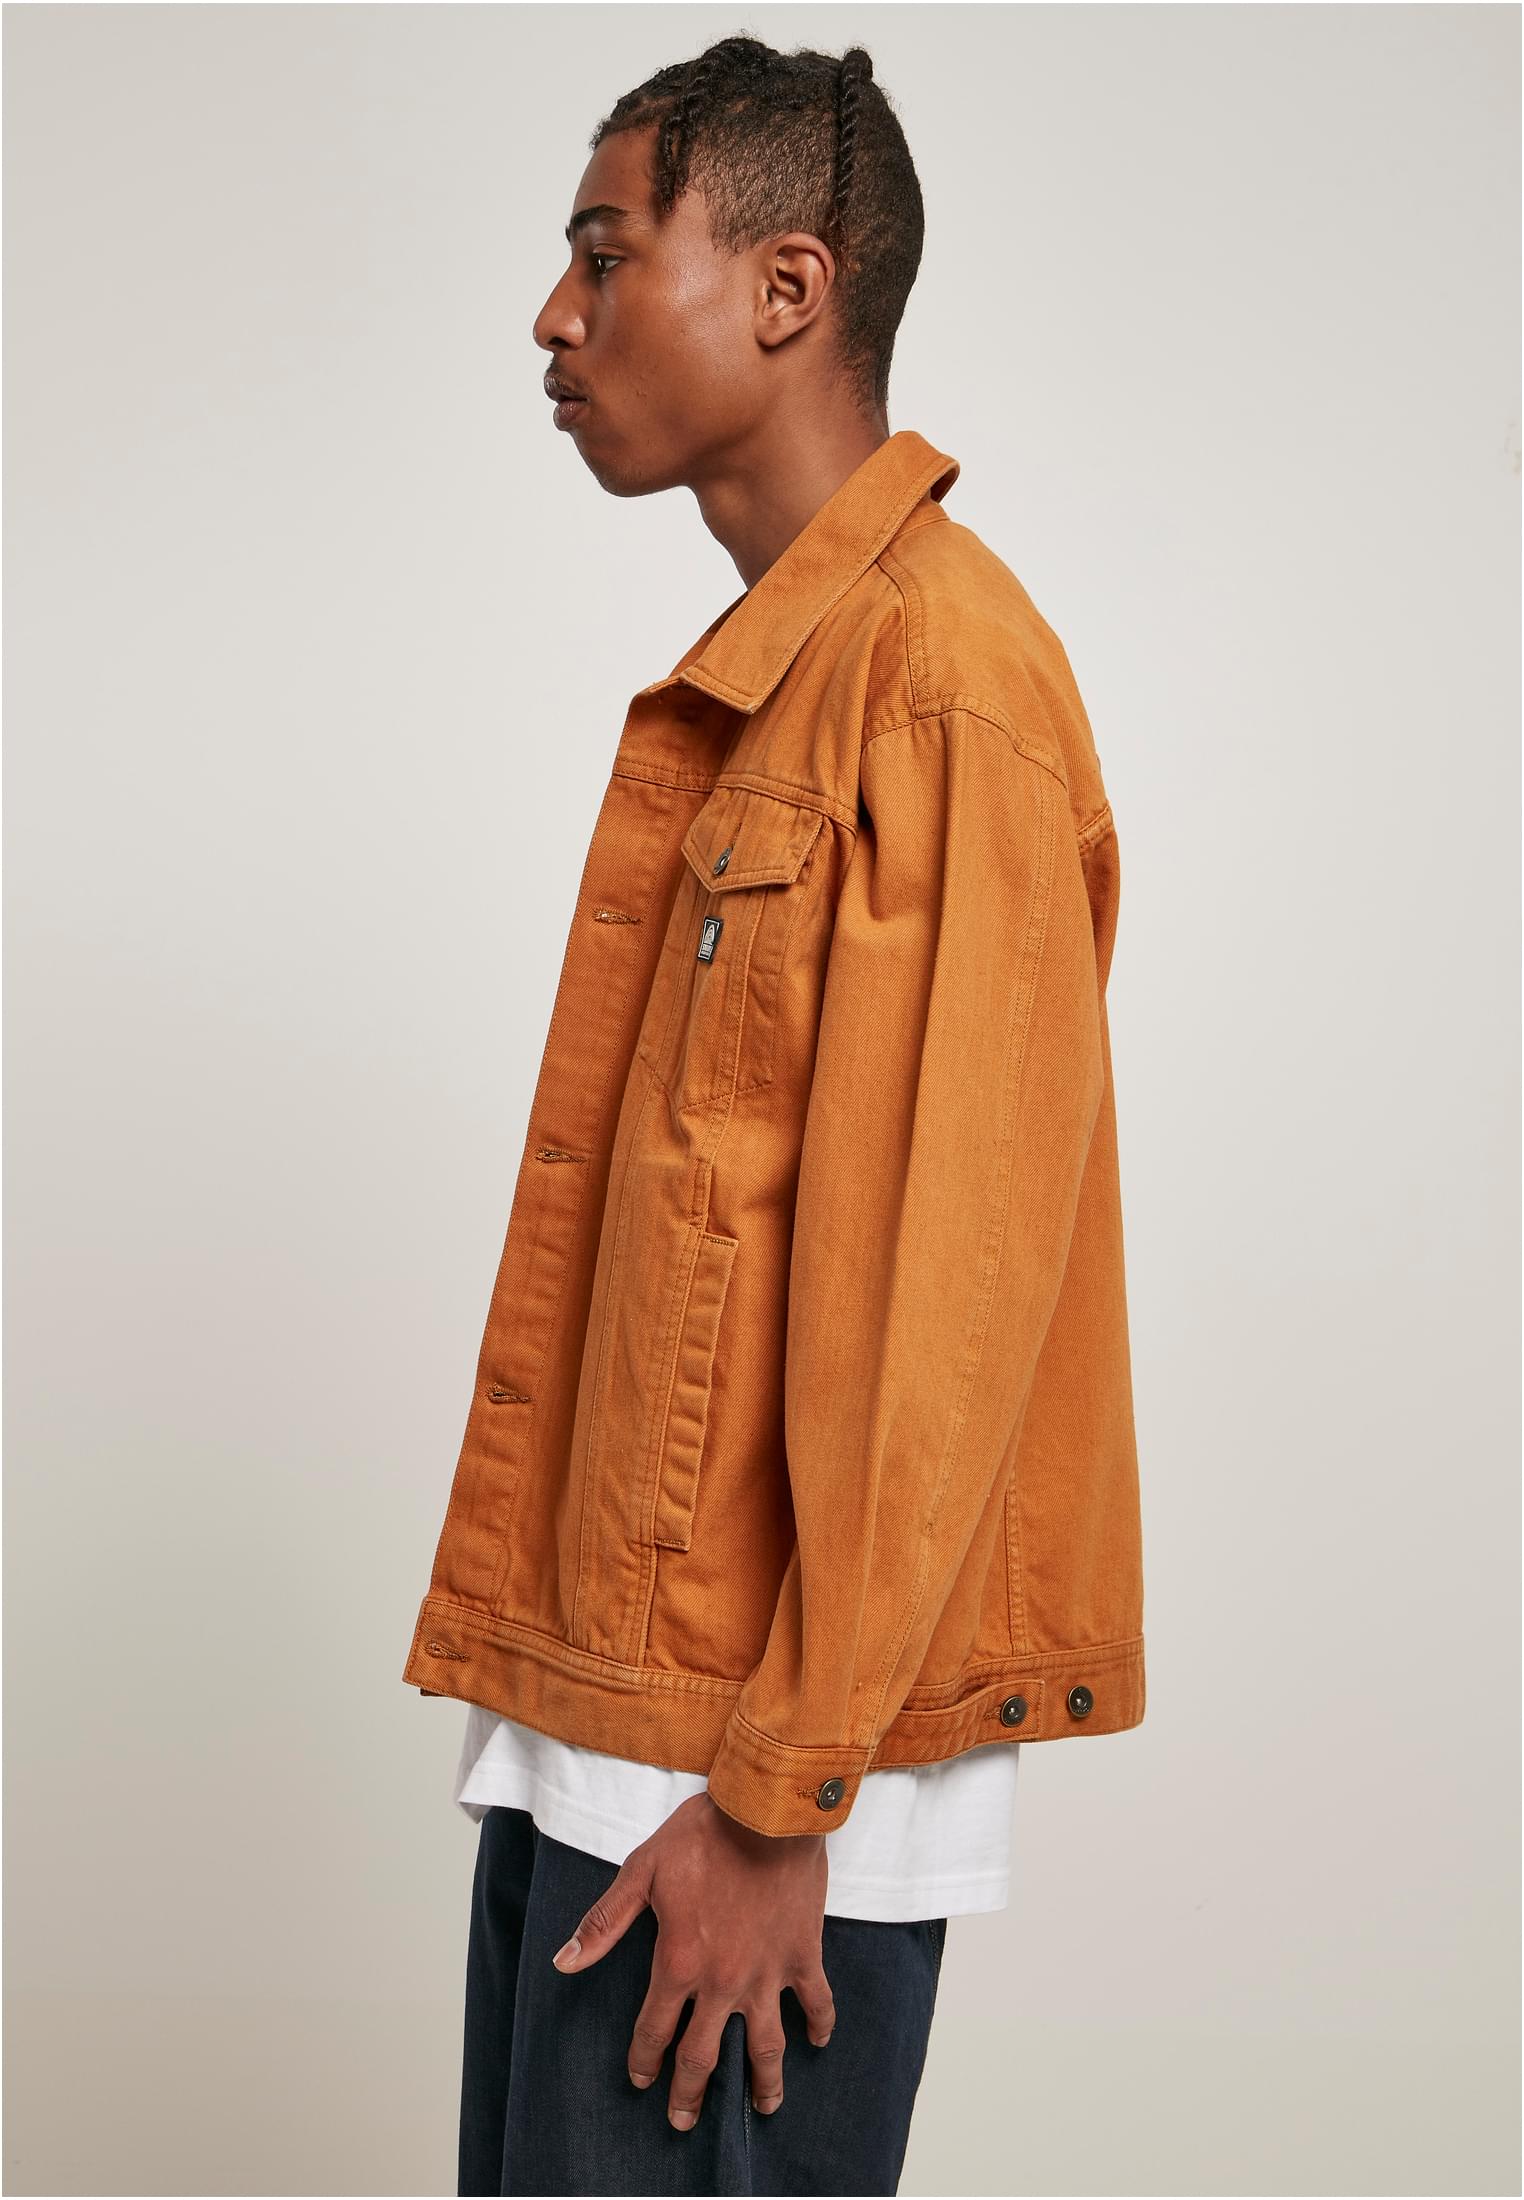 Saisonware Southpole Script Cotton Jacket in Farbe toffee